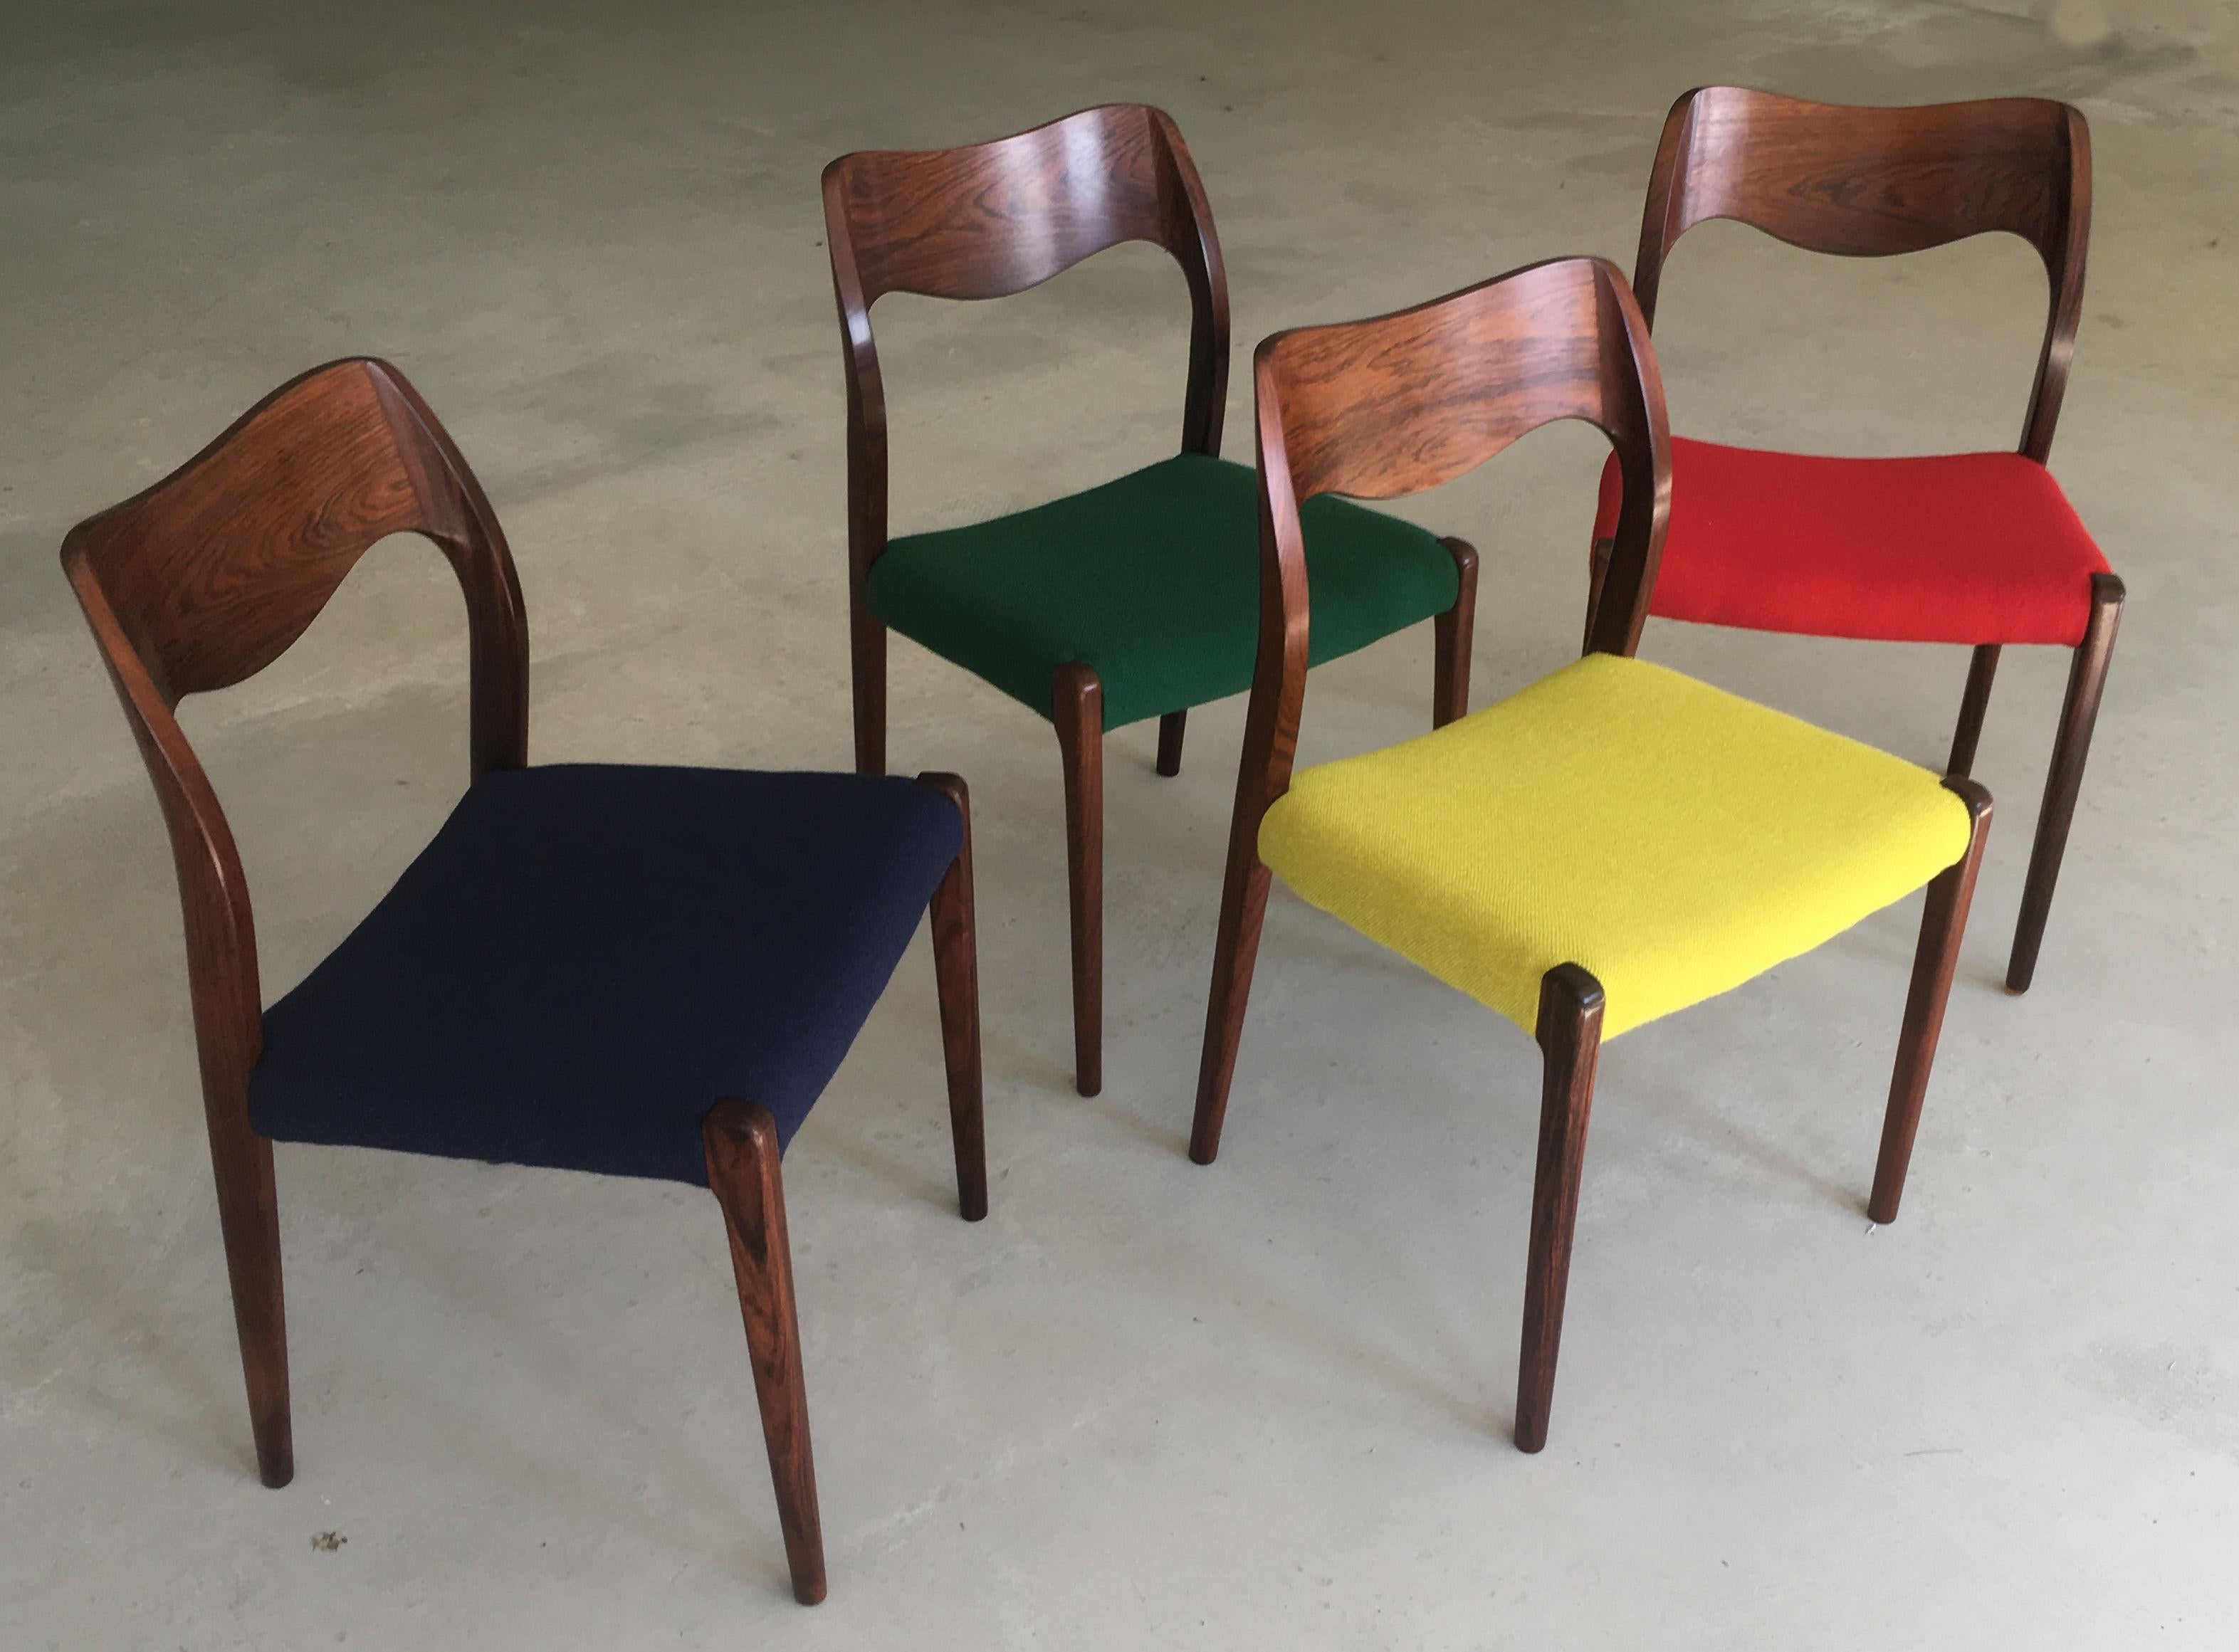 Set of four fully restored model 71 rosewood dining chairs designed by Niels Otto Møller in 1951.

The chairs feature a solid frame and backrest in rosewood designed with straight lined legs and an elegant organic shaped backrest with the soft lines